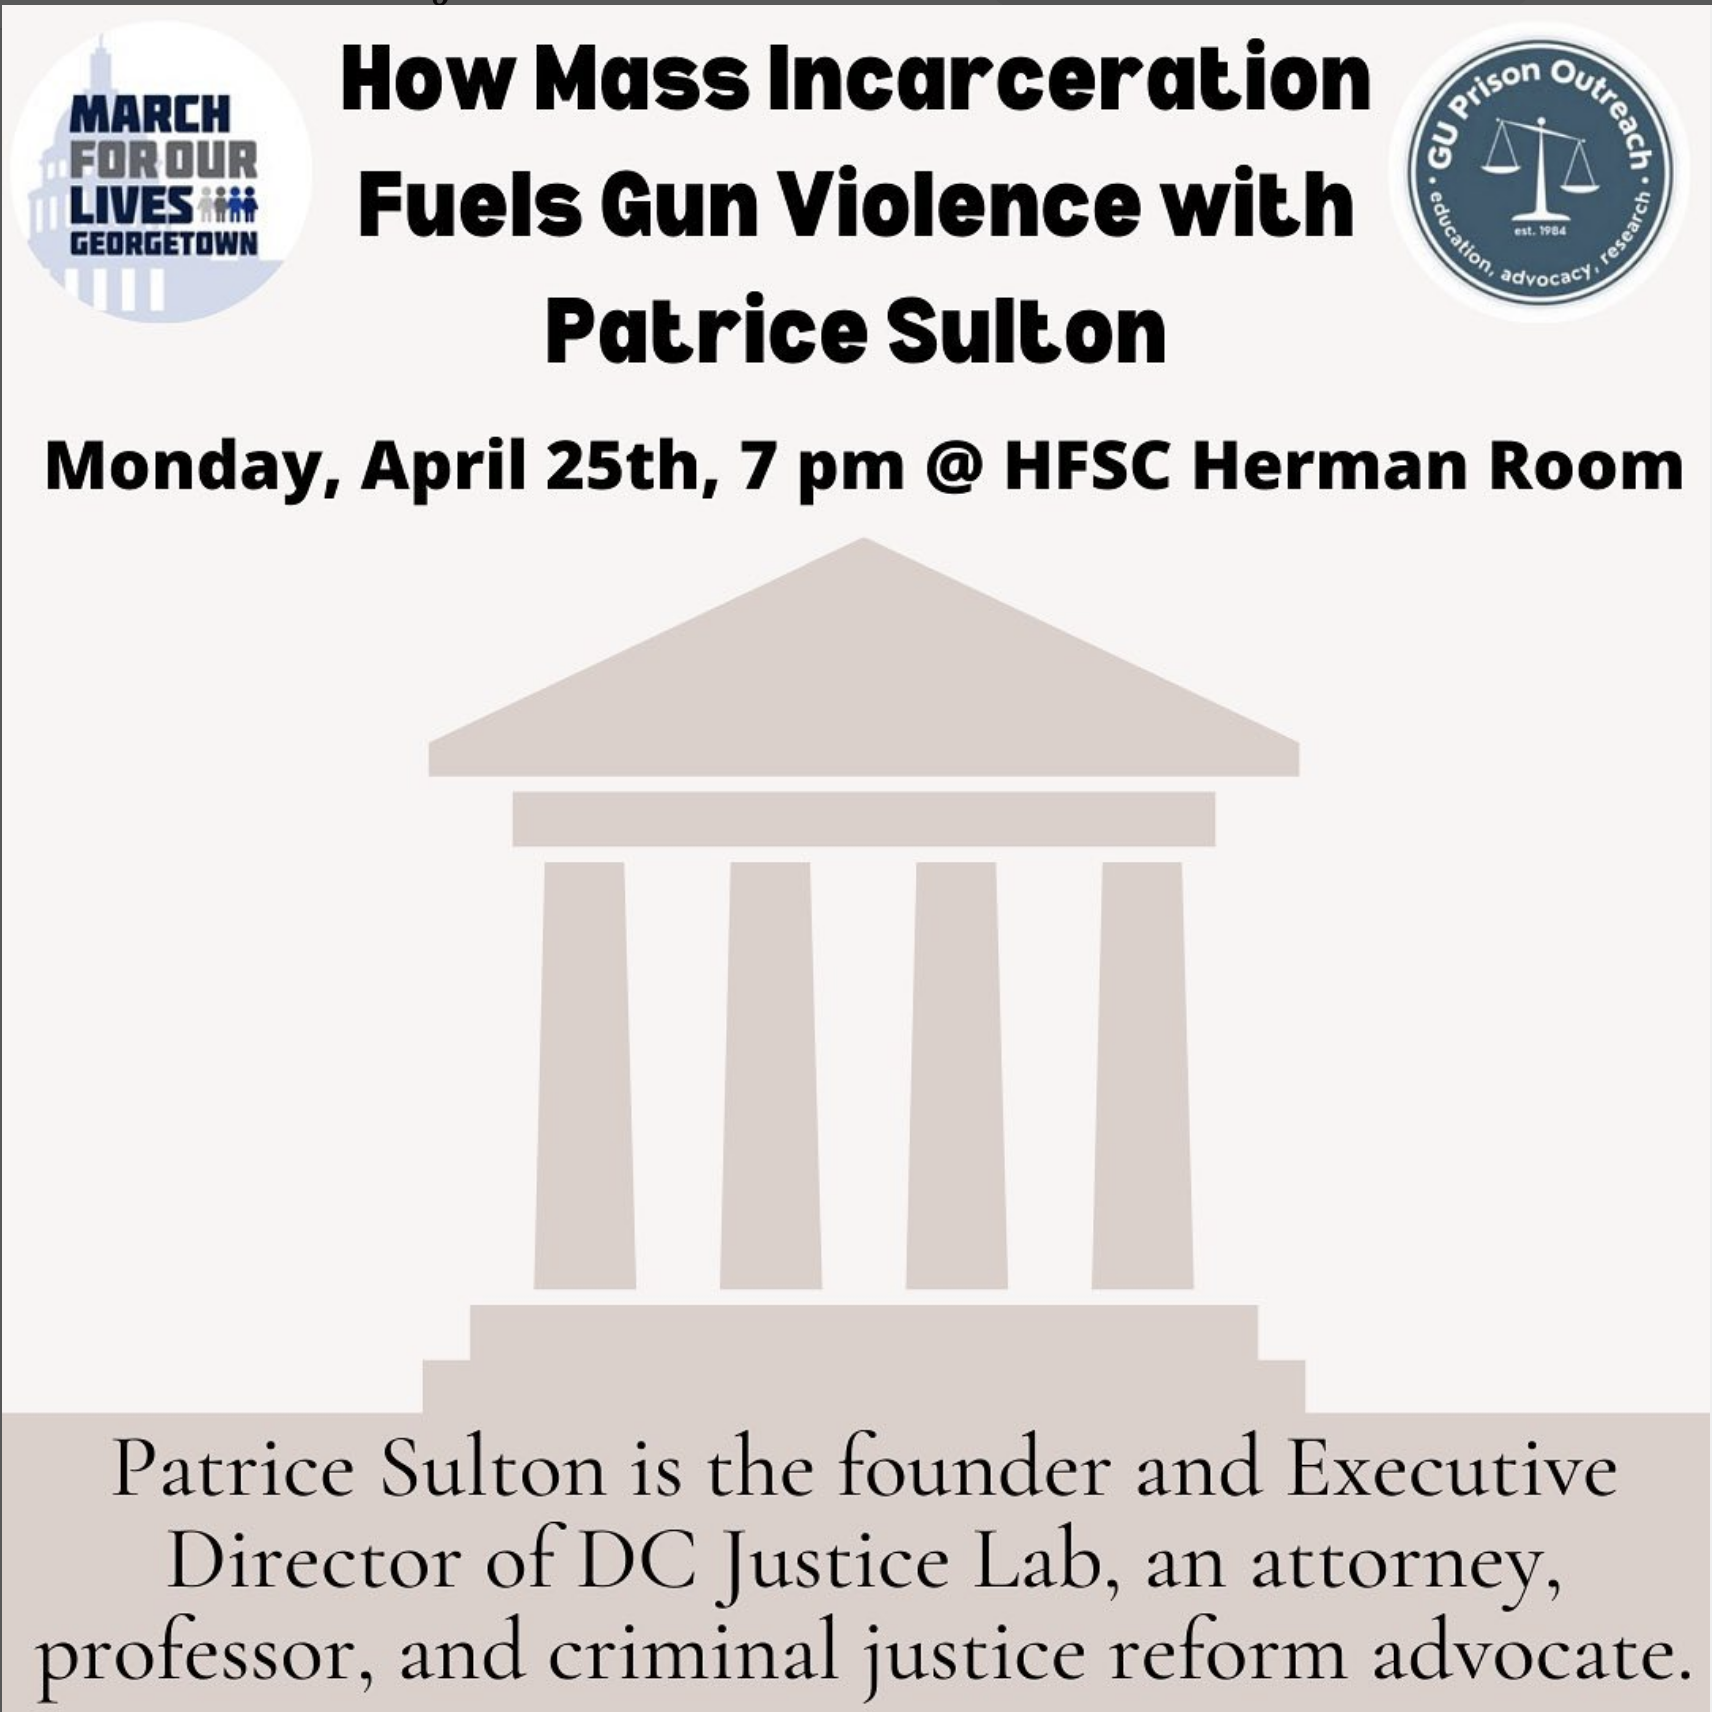 How Mass Incarceration Fuels Gun Violence with Patrice Sulton